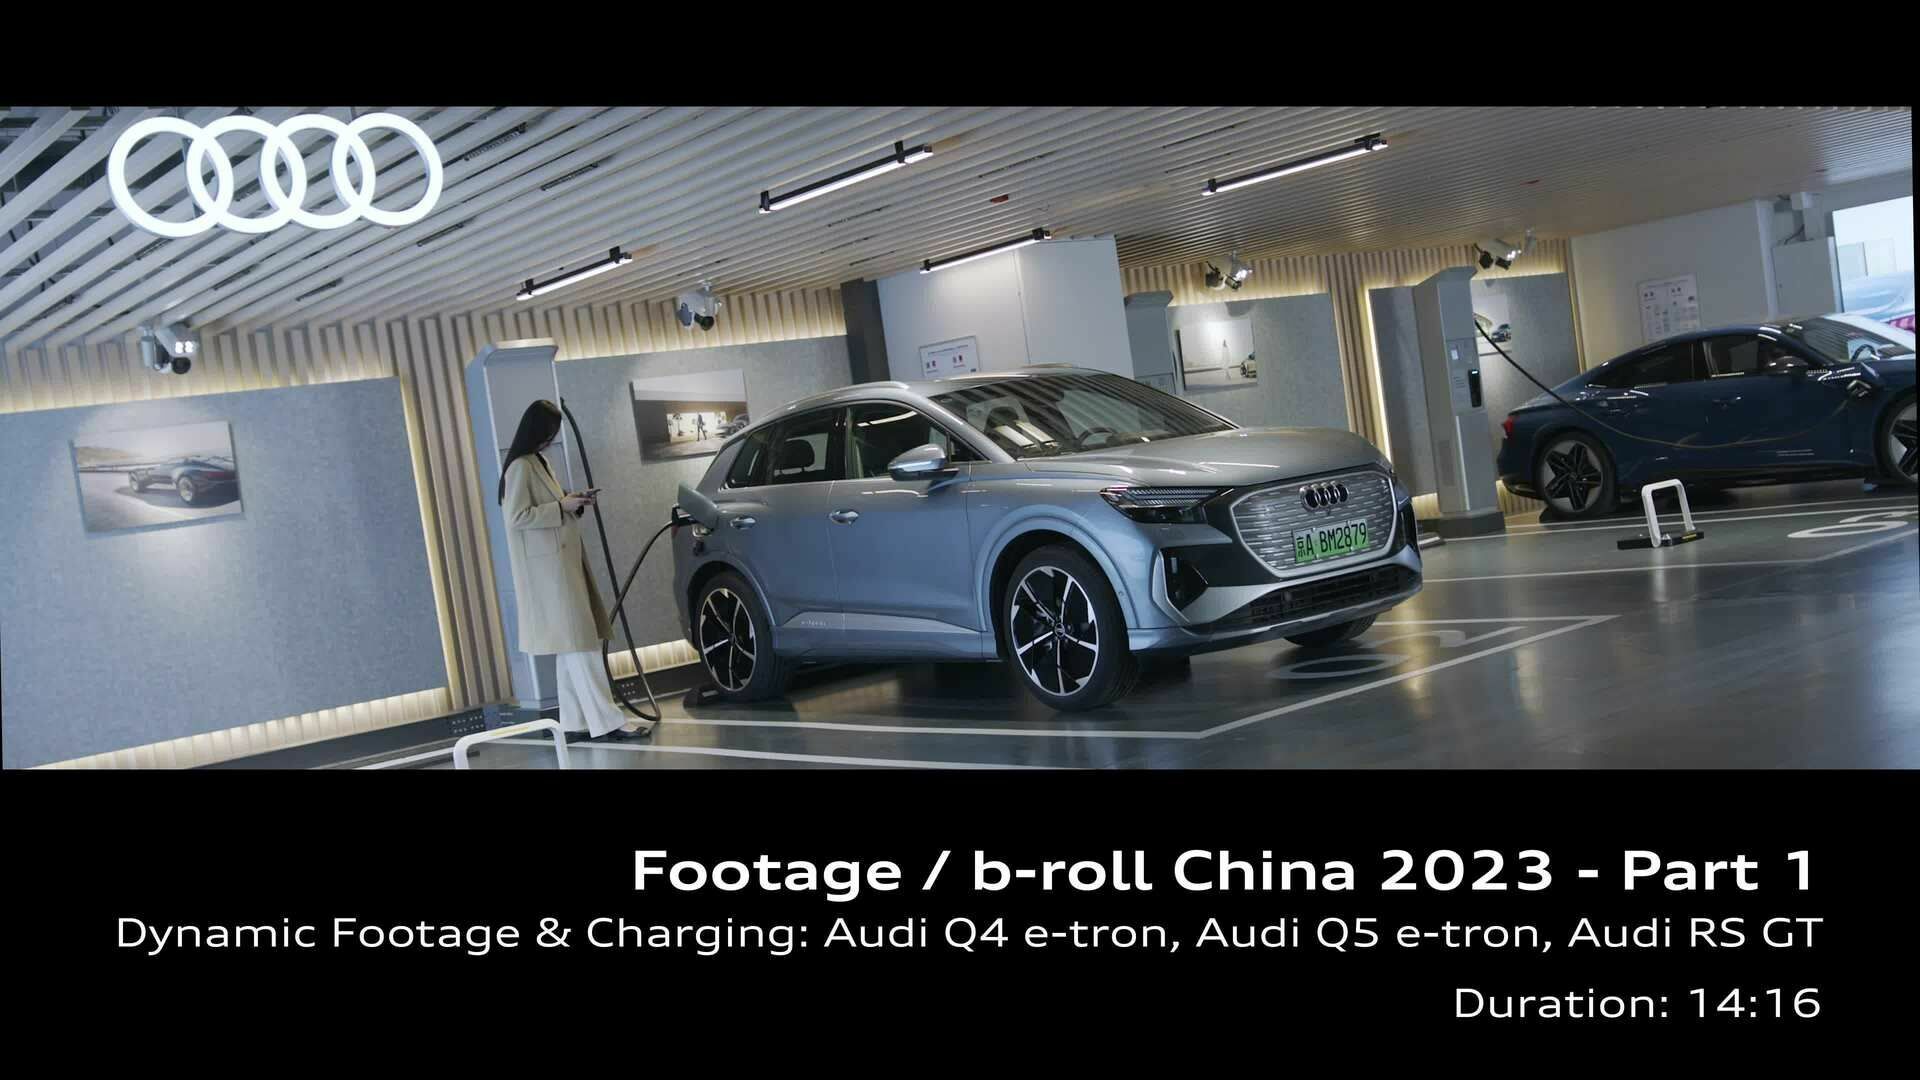 Footage: Auto China – Driving scenes & Audi charging stations